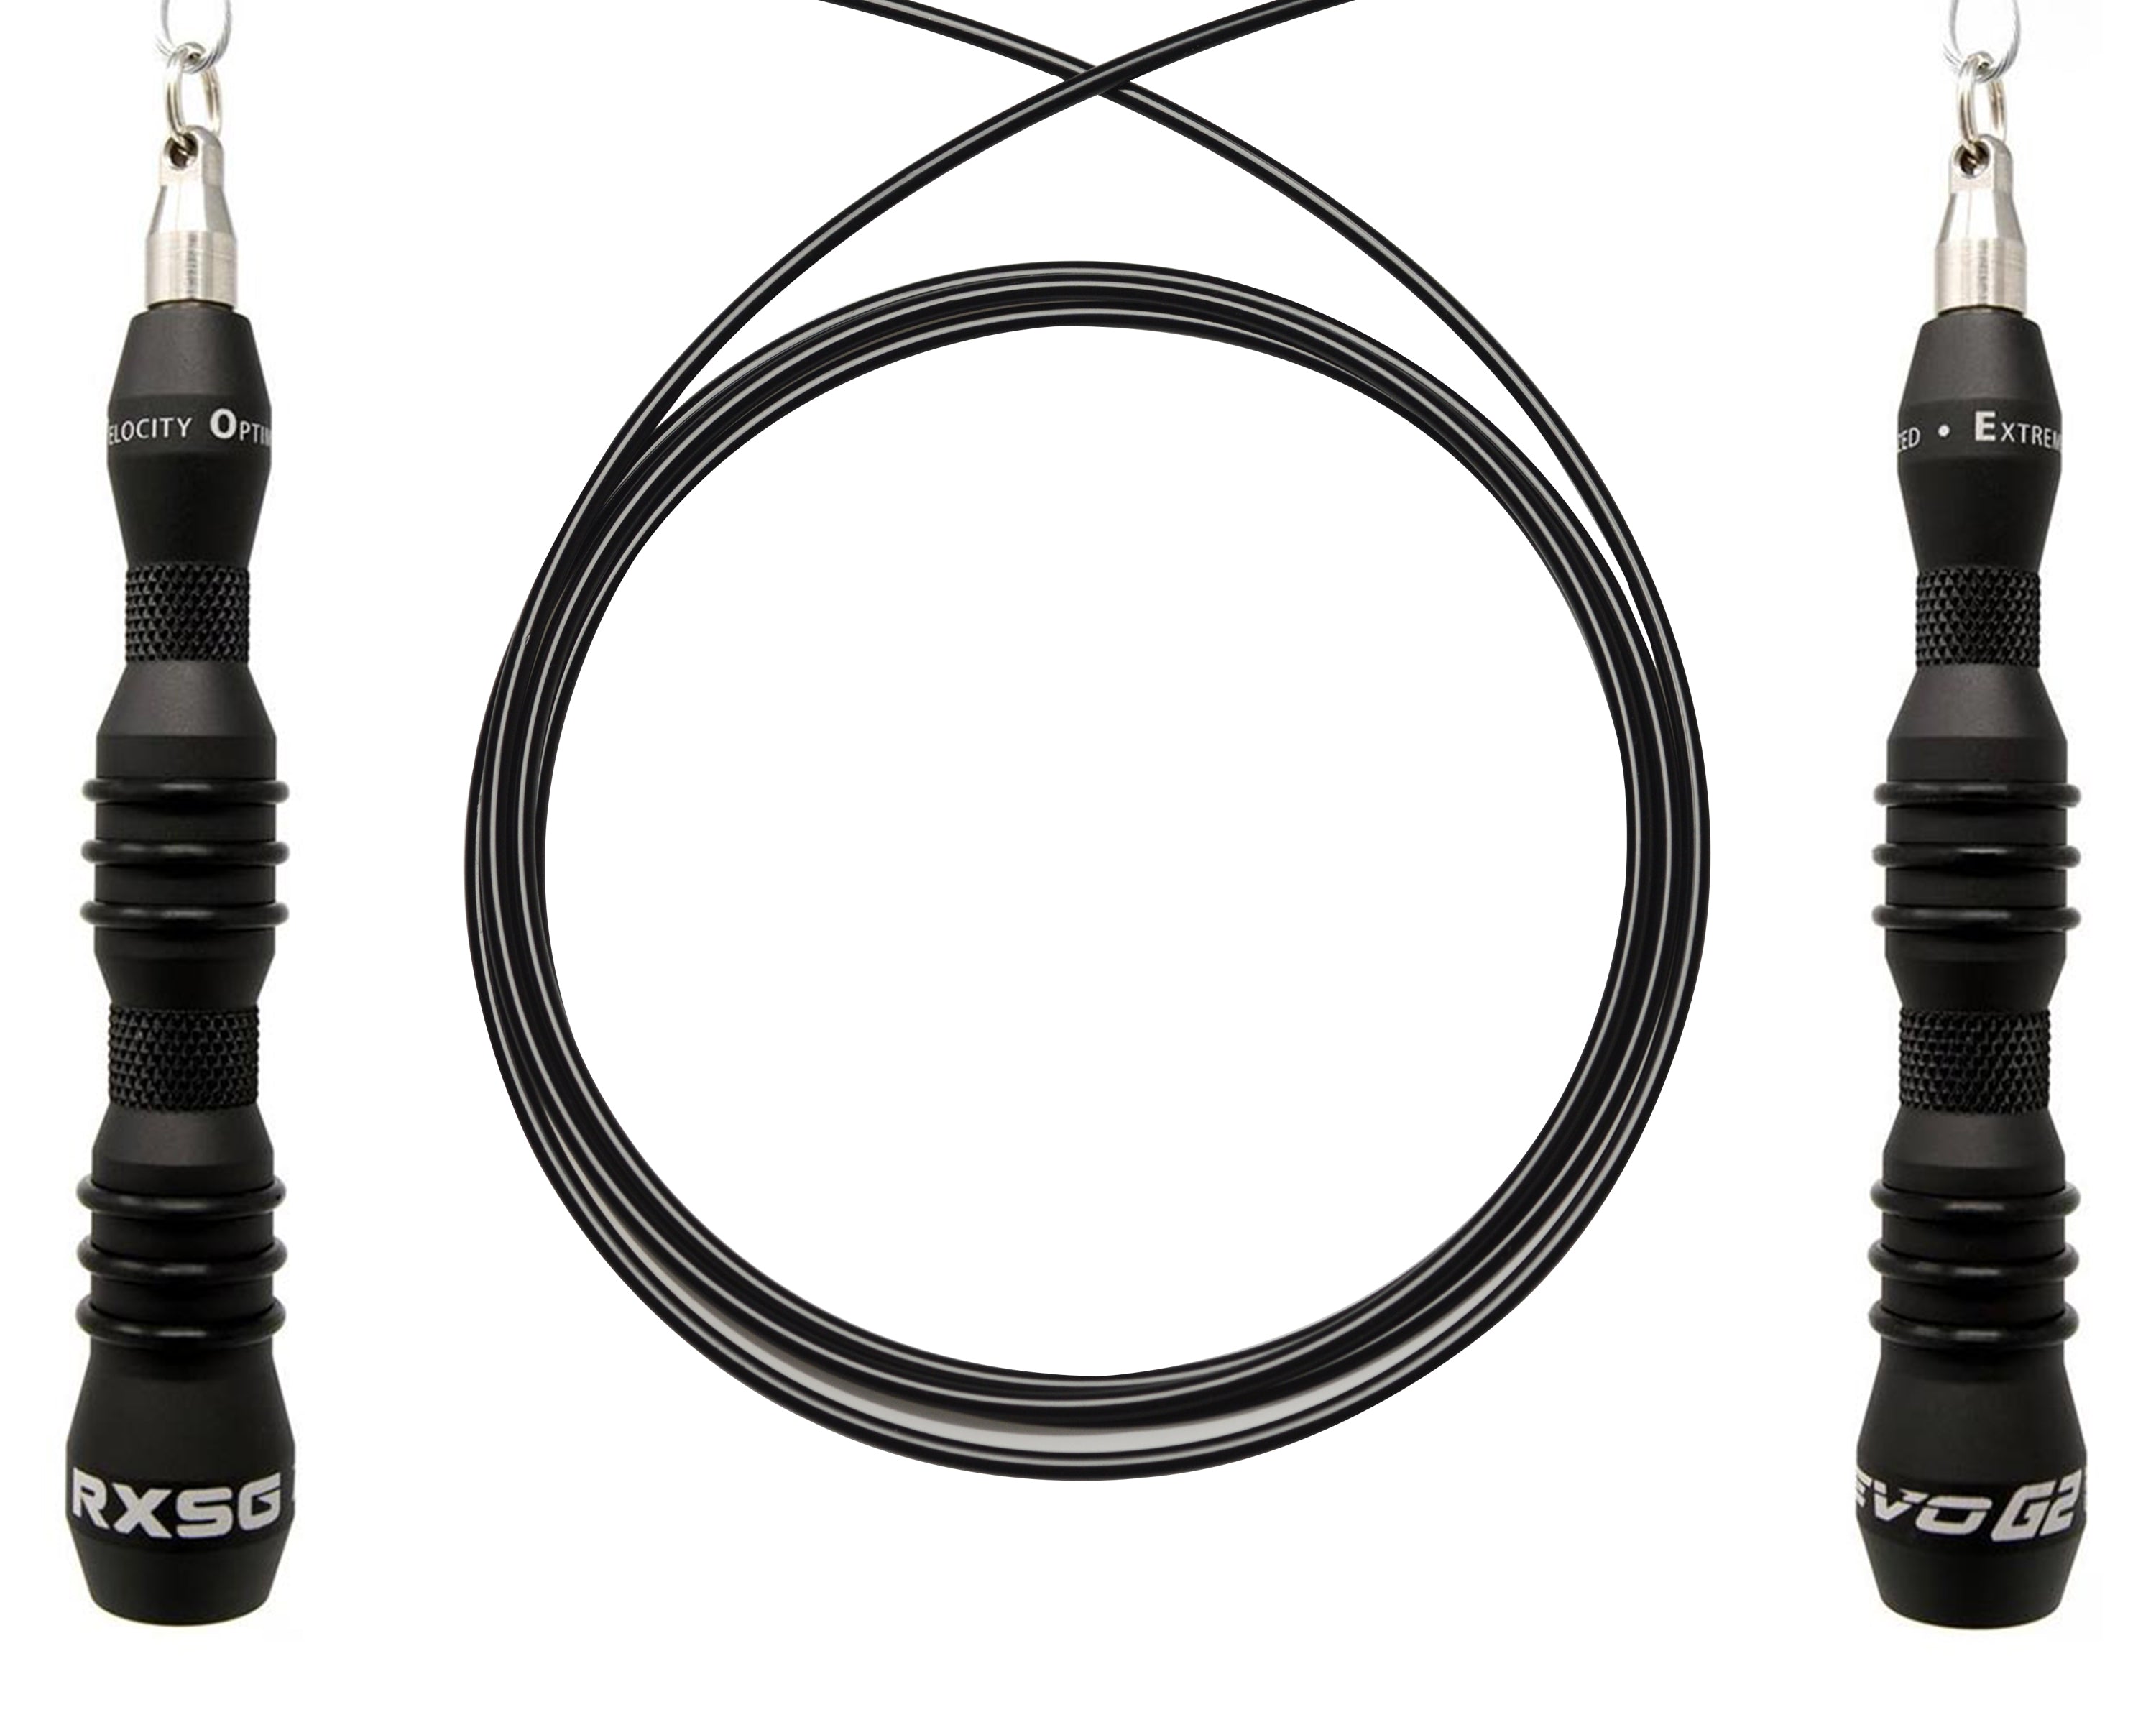 EVO G2 Speed Rope with Black Cable